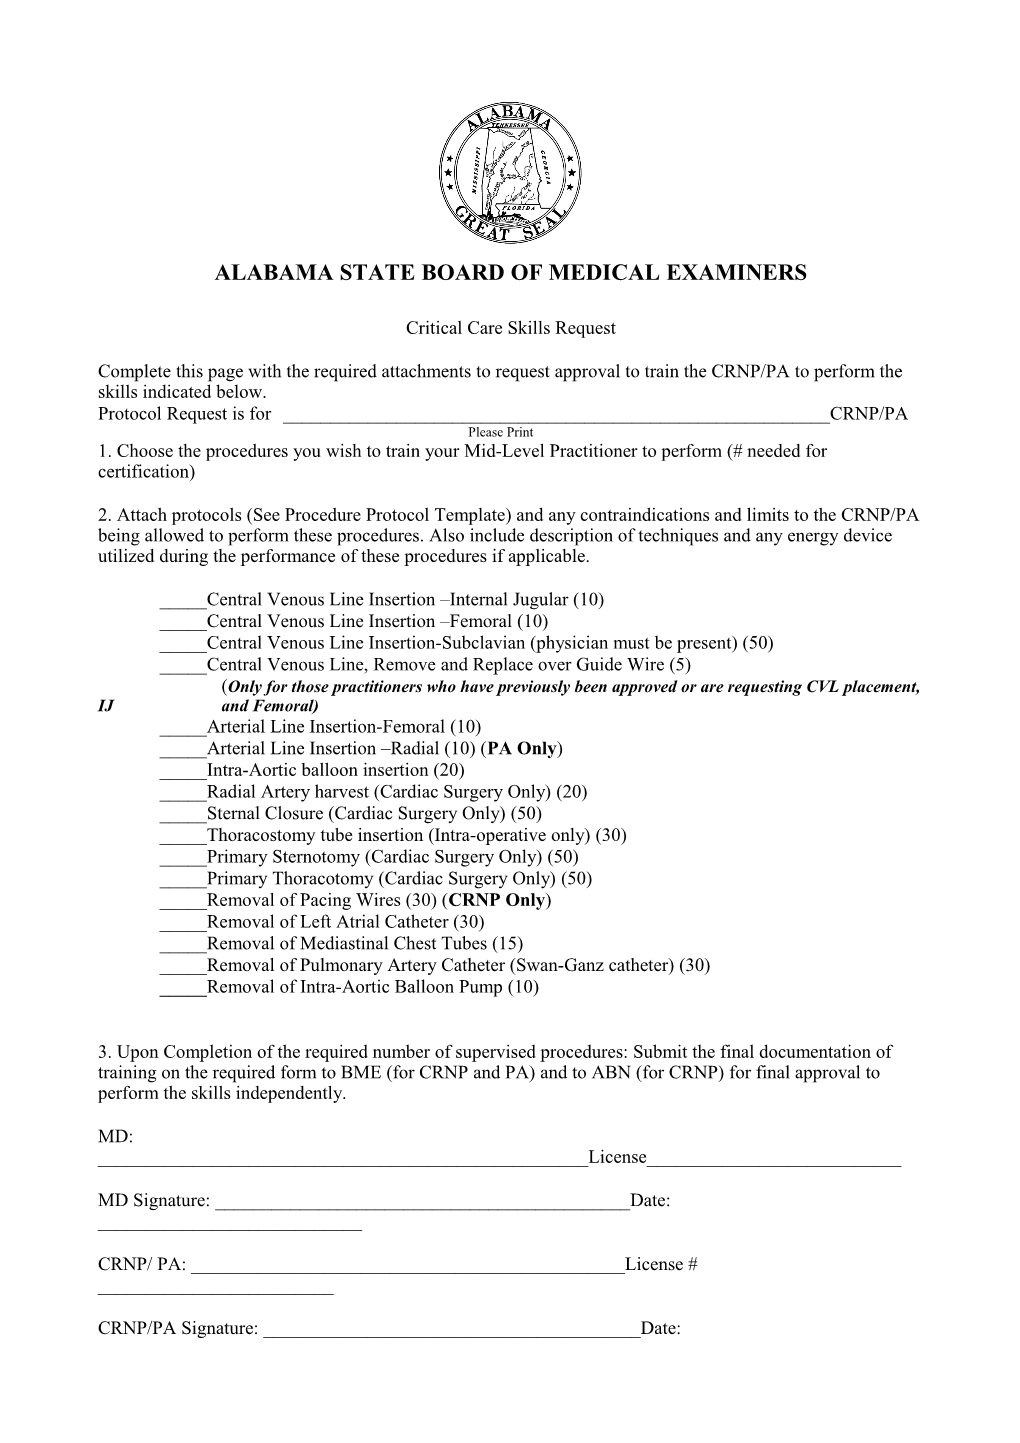 Alabama State Board of Medical Examiners